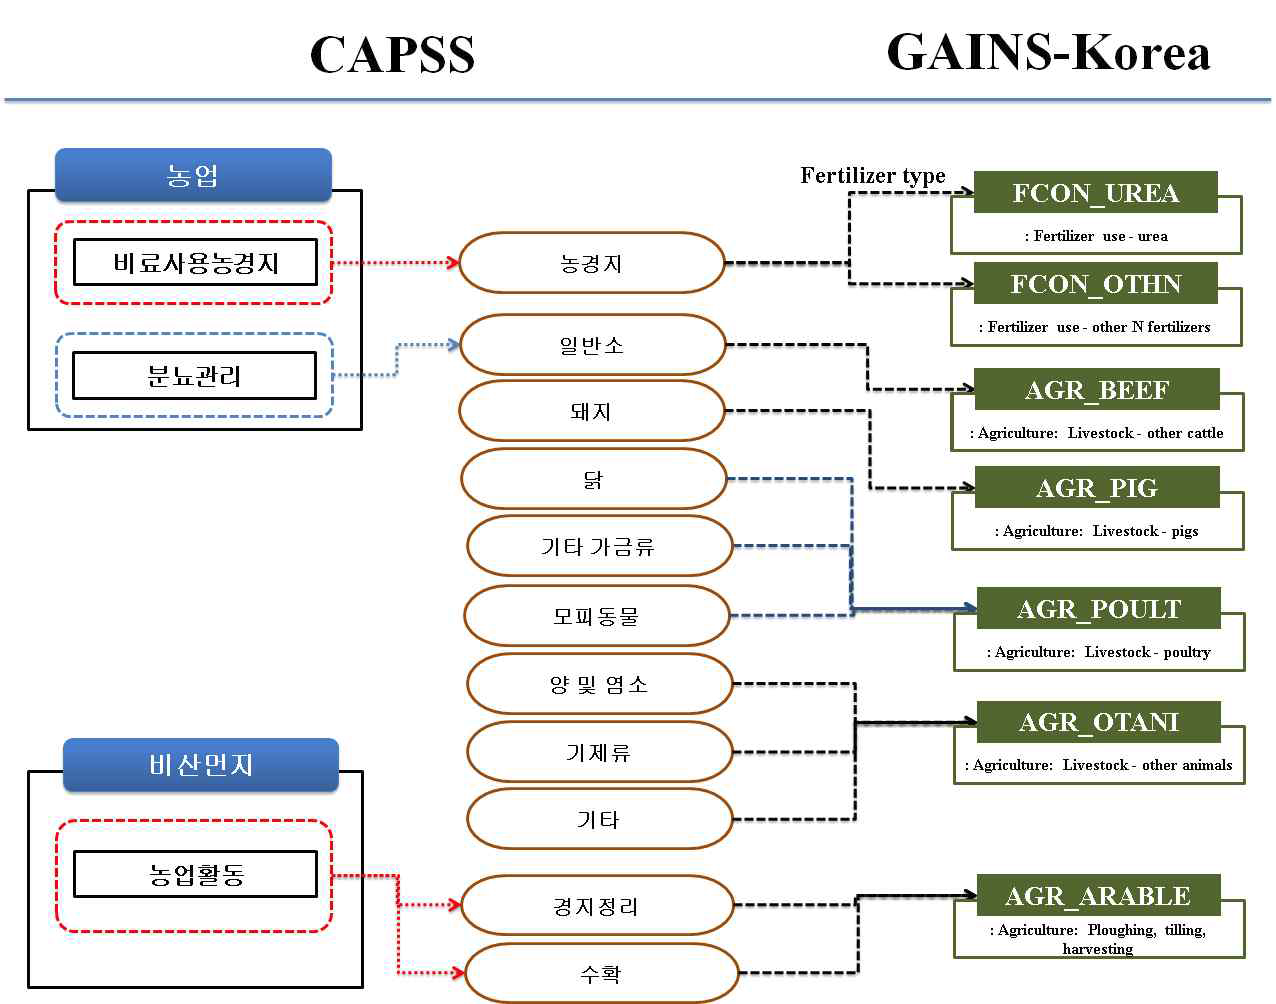 Flowchart of mapping process for Agriculture sector between CAPSS and GAINS-Korea